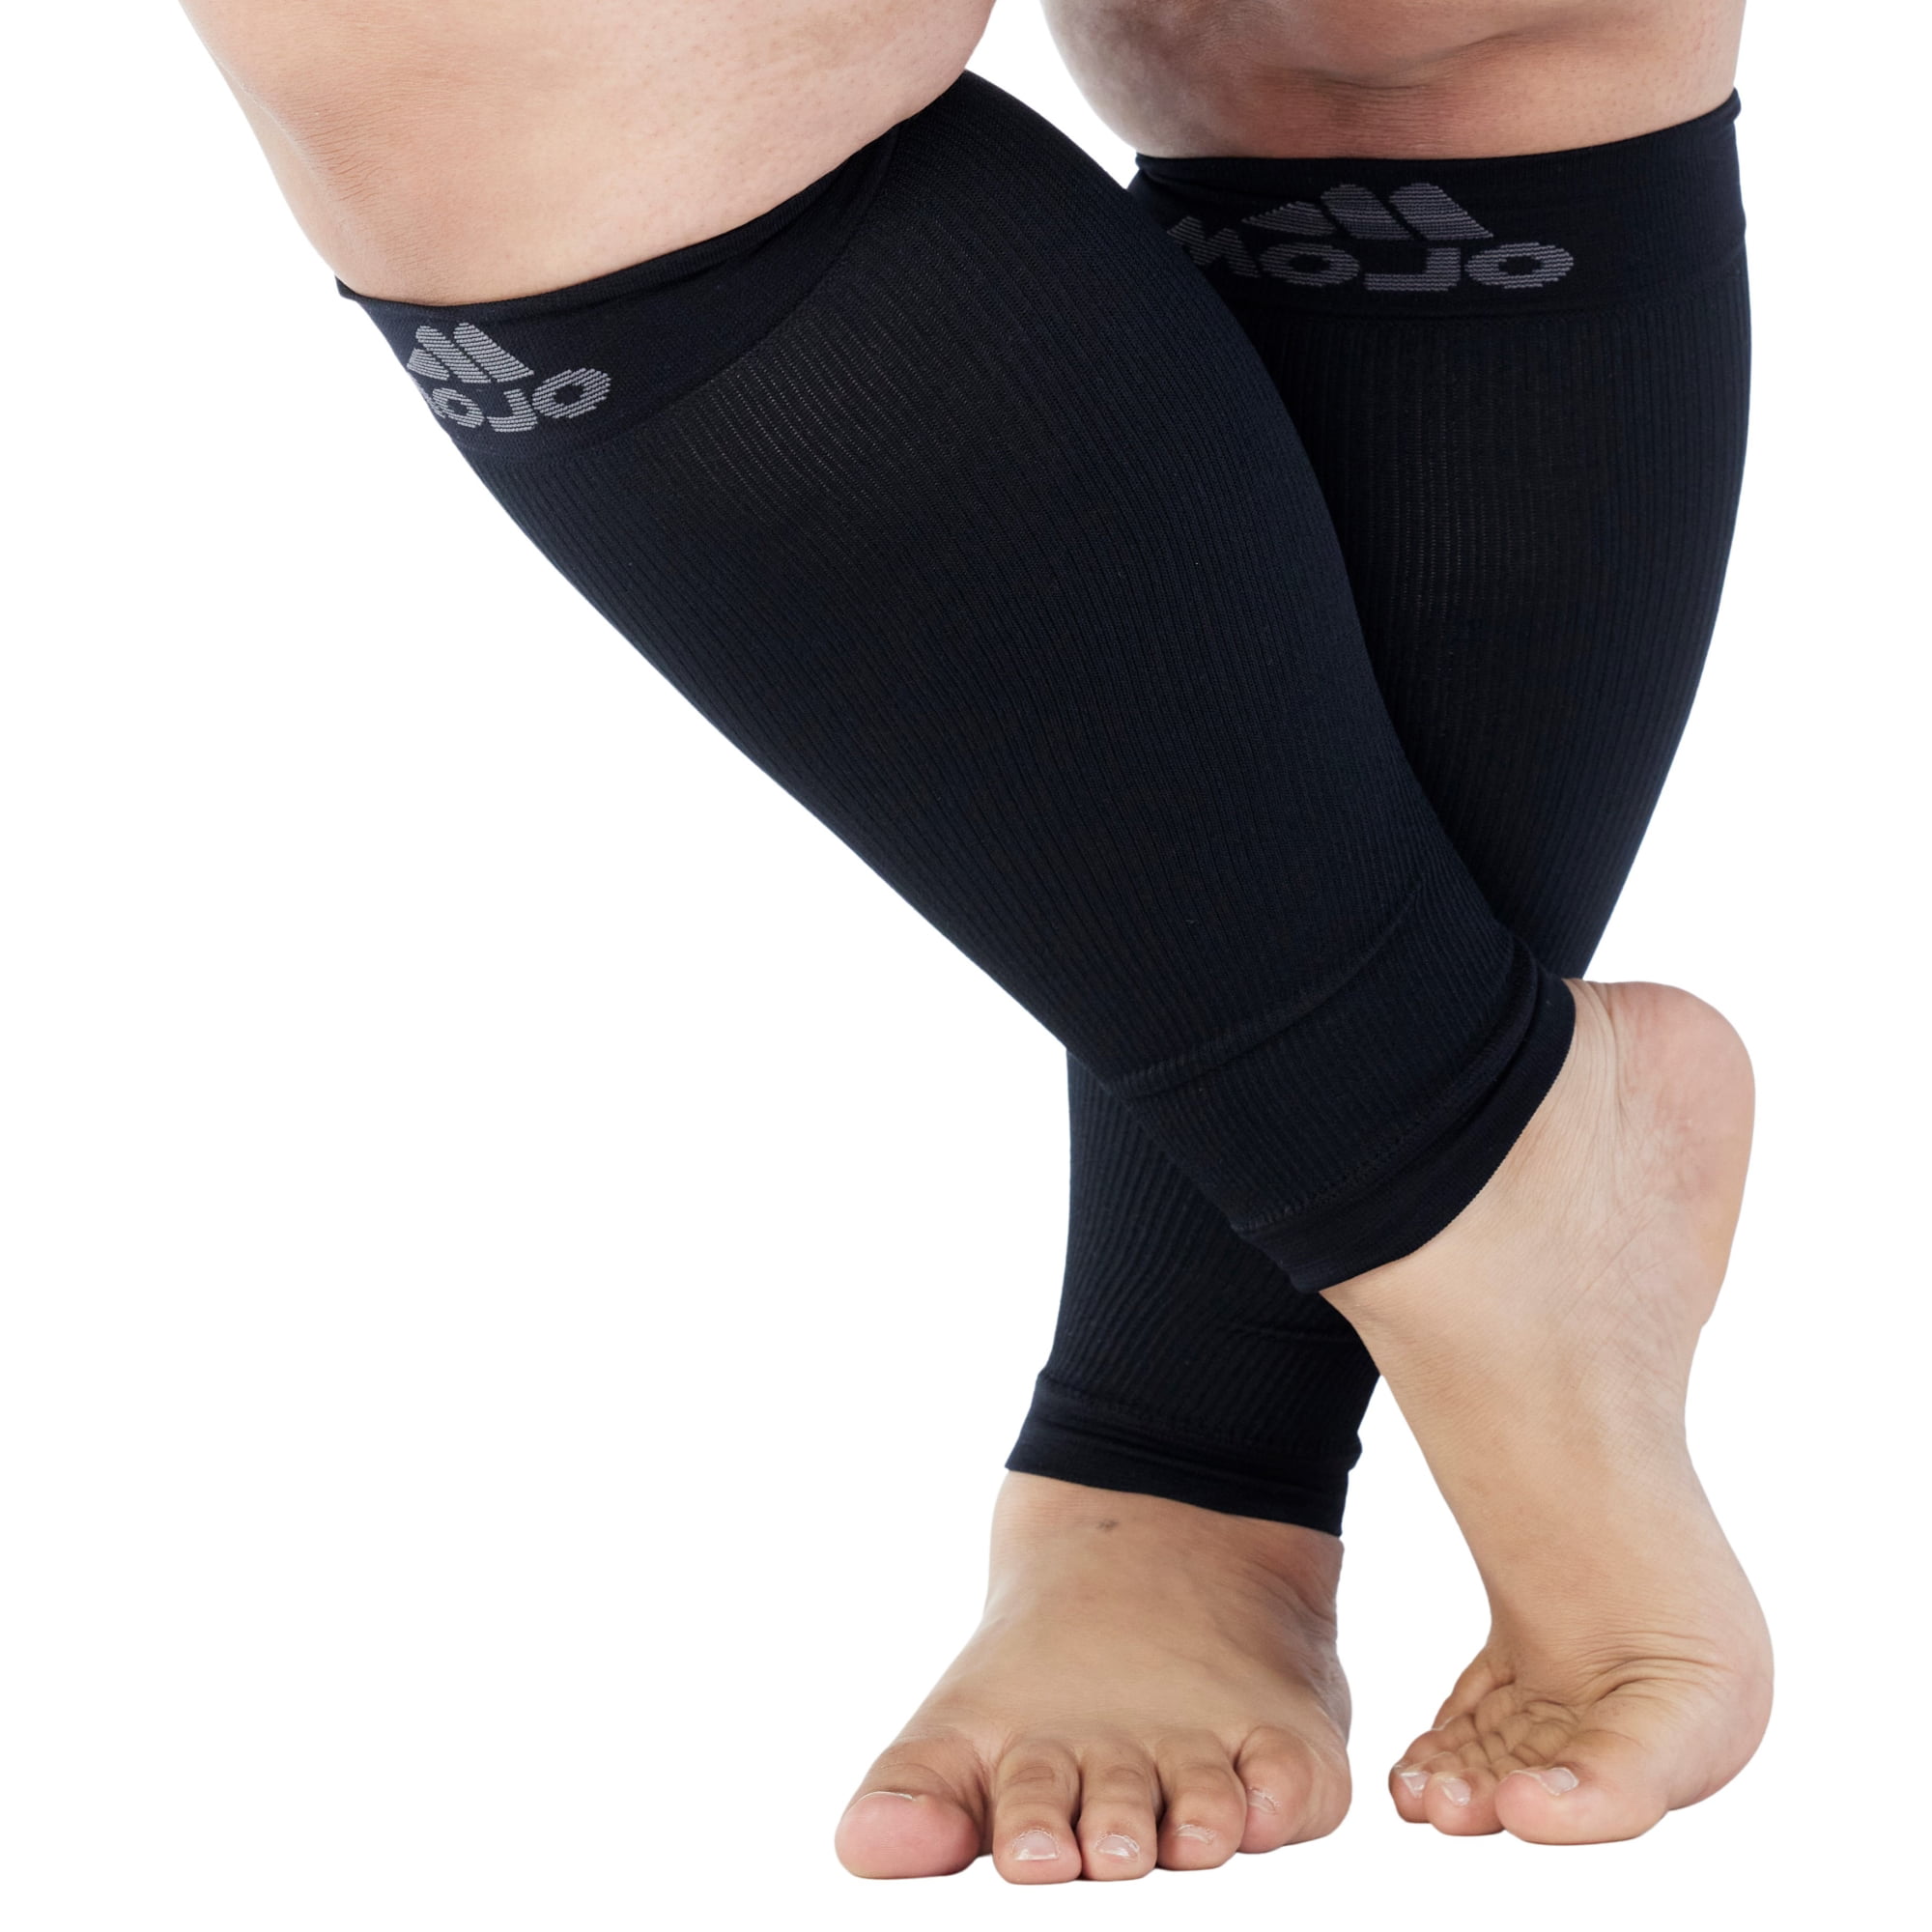 Gift S/M, Black / Blue 2Pair Calf Support Compression Leg Sleeve Sport Sock Outdoor Activit Reduce Pain Swelling 